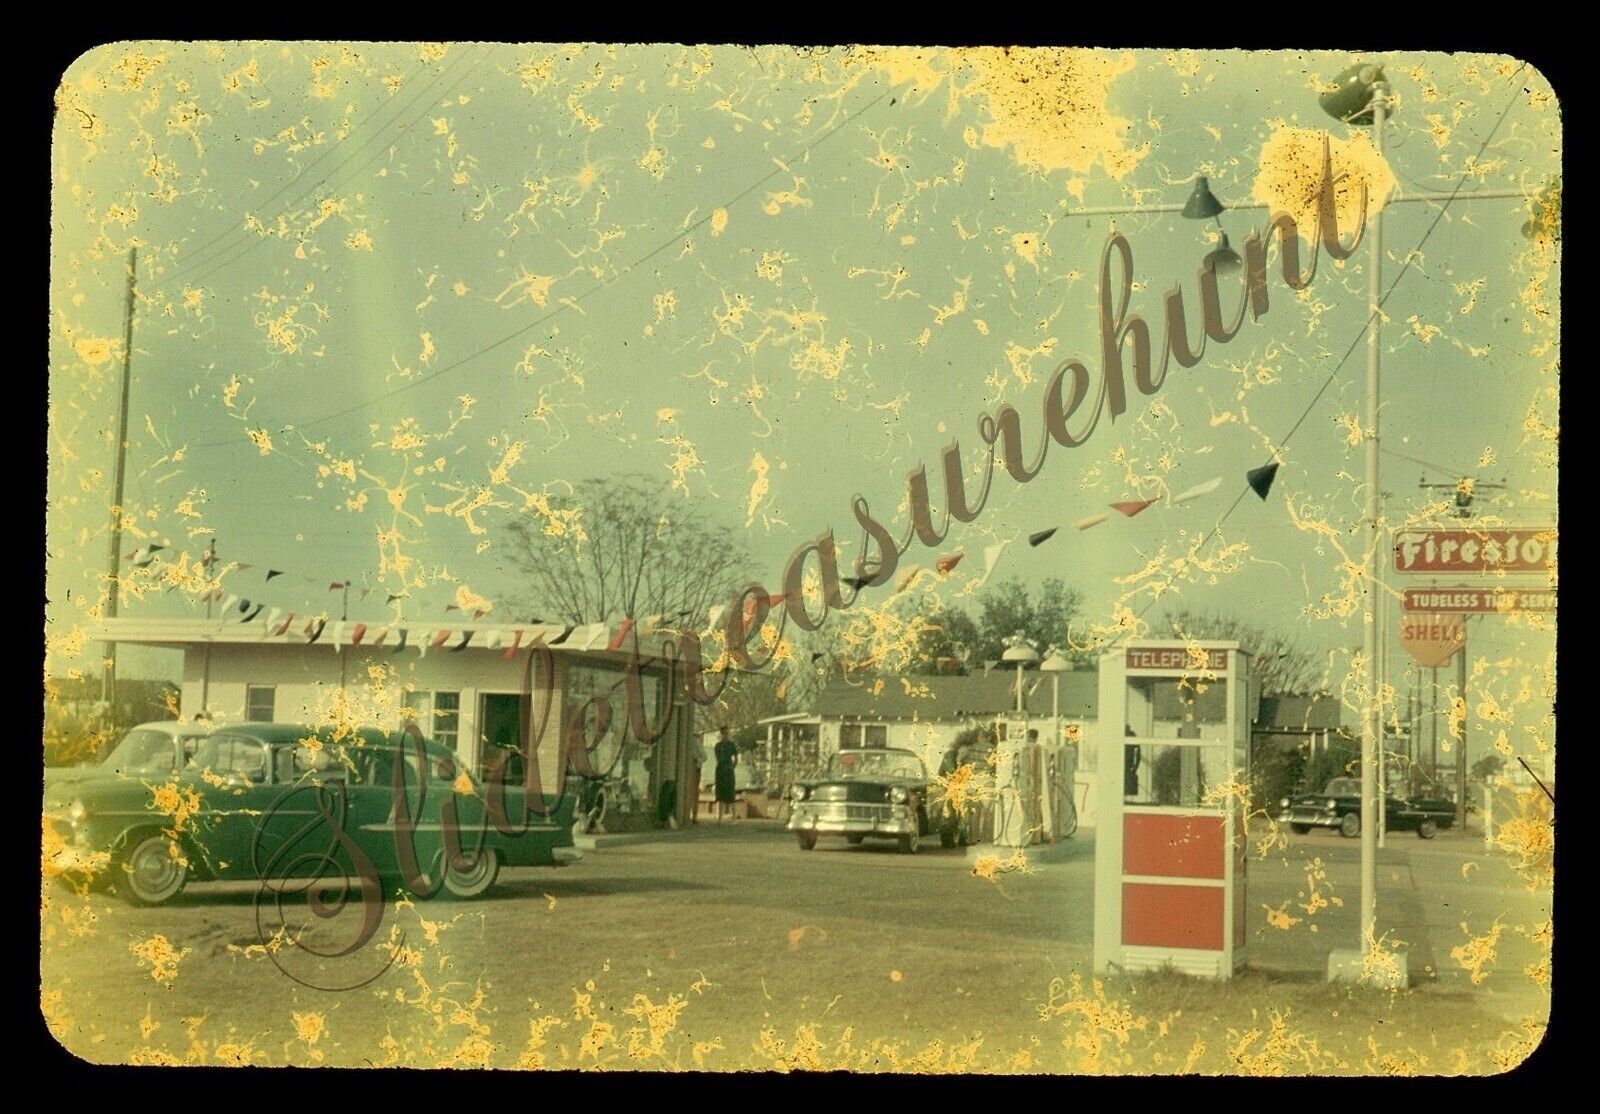 Shell Gas Station Cars 35mm Slide 1950s Damaged Firestone Telephone Booth